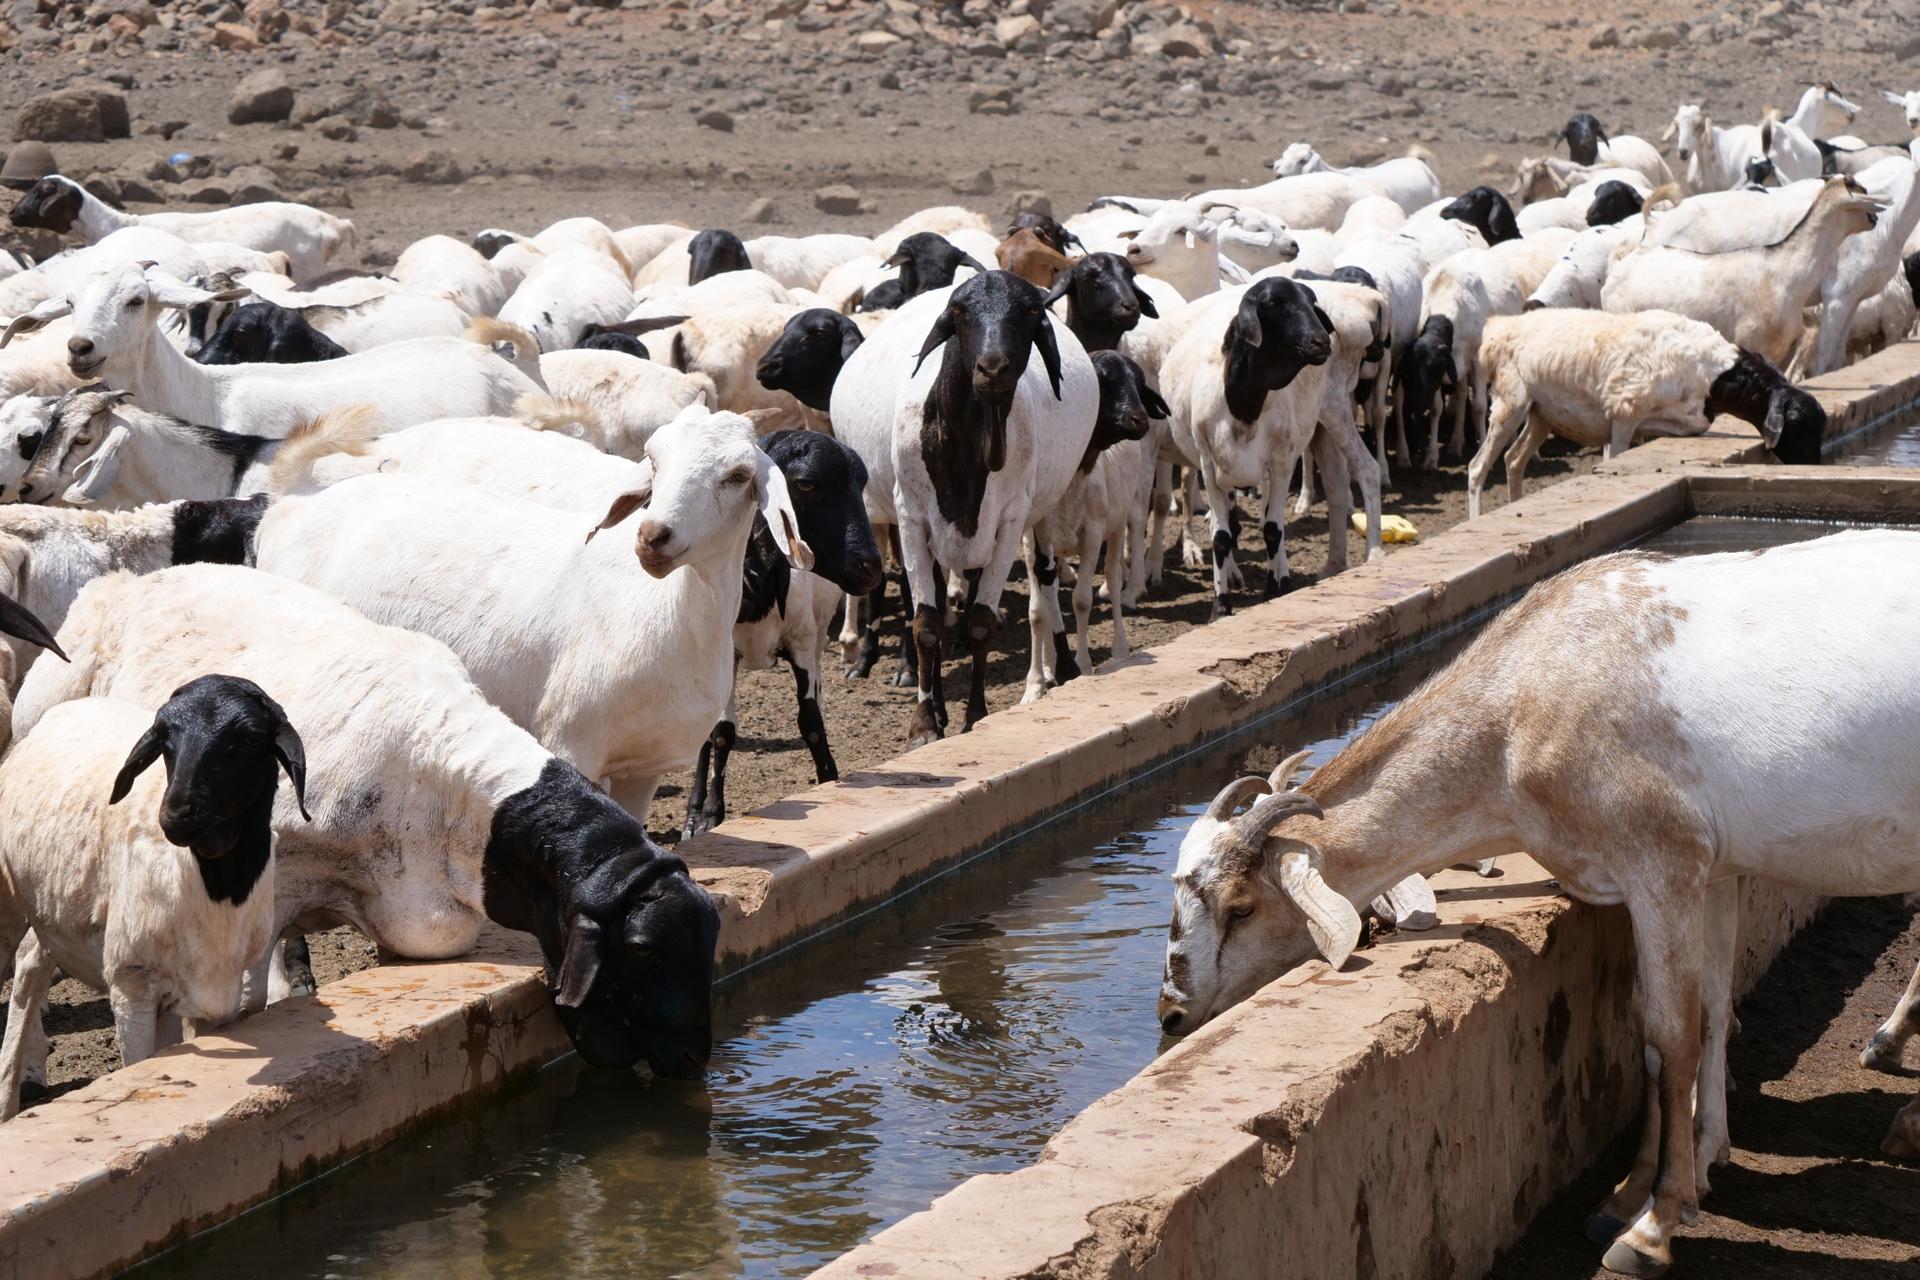 Animals drink from water sourced from a borehole in Marsabit County. Local herders say some have collapsed on the way as the distance between pasture and water grows, Nov. 3, 2021.